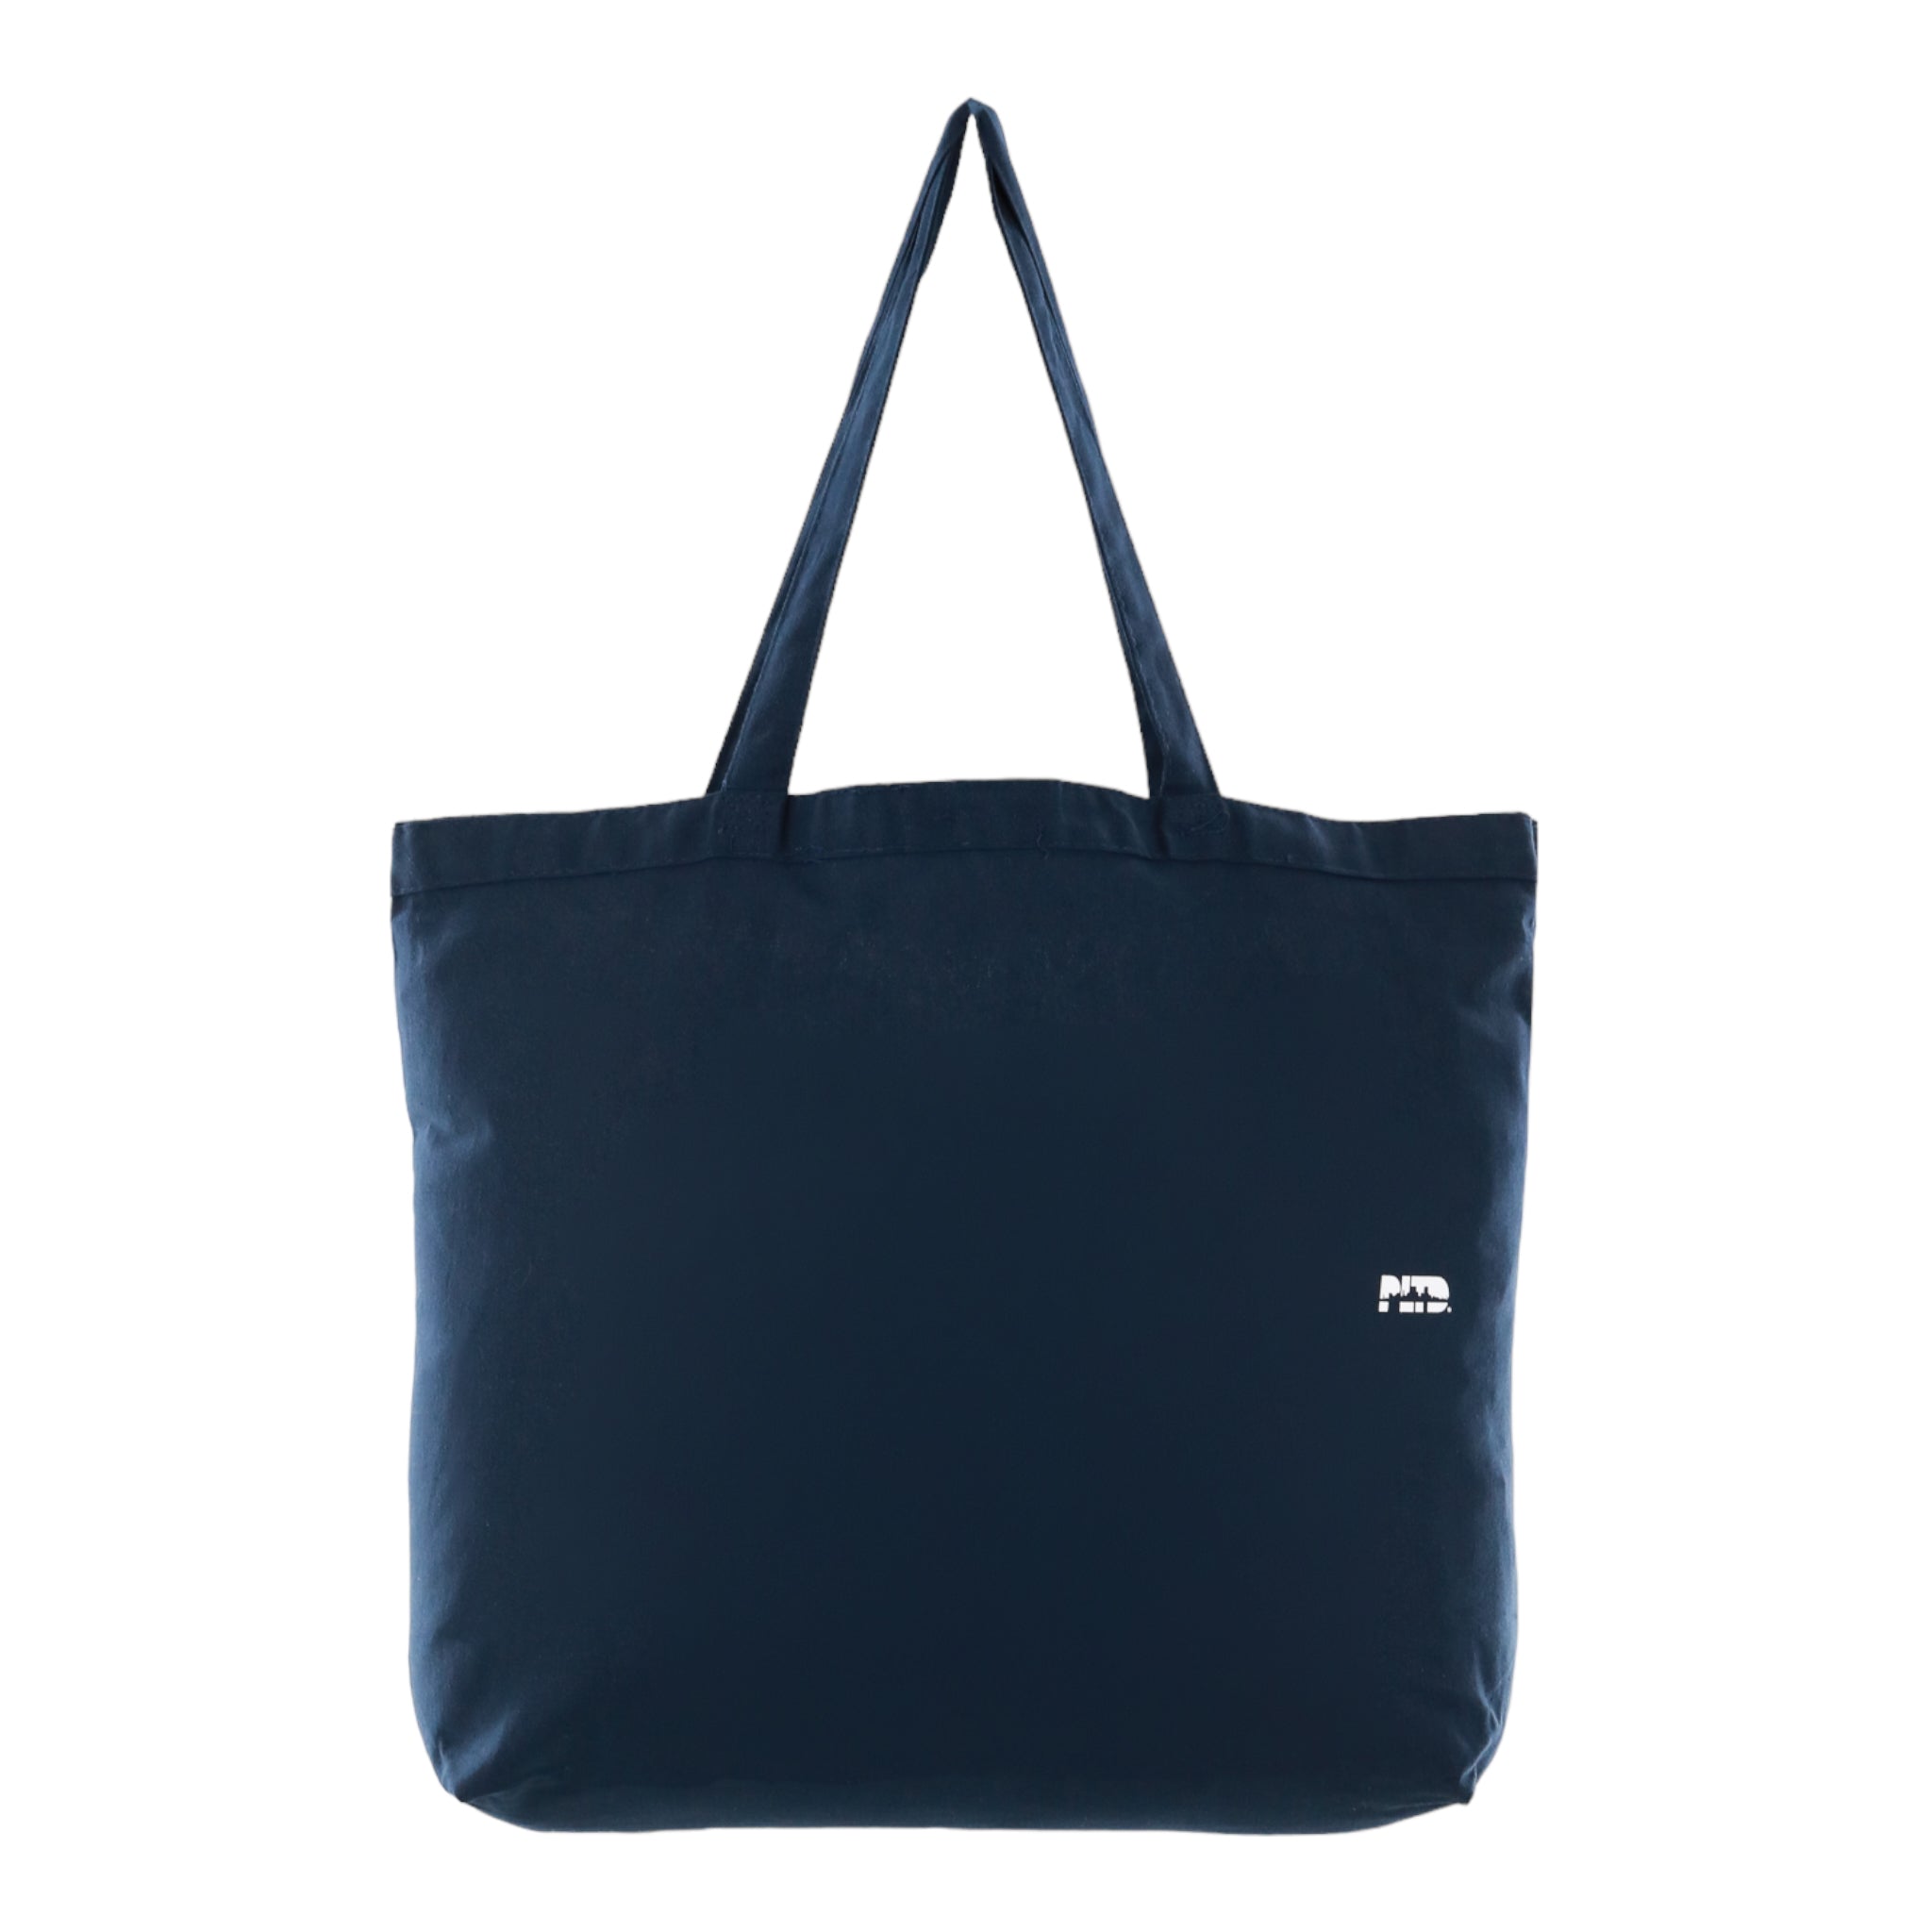 Stay Out of Uptown - Navy Canvas Tote Bag